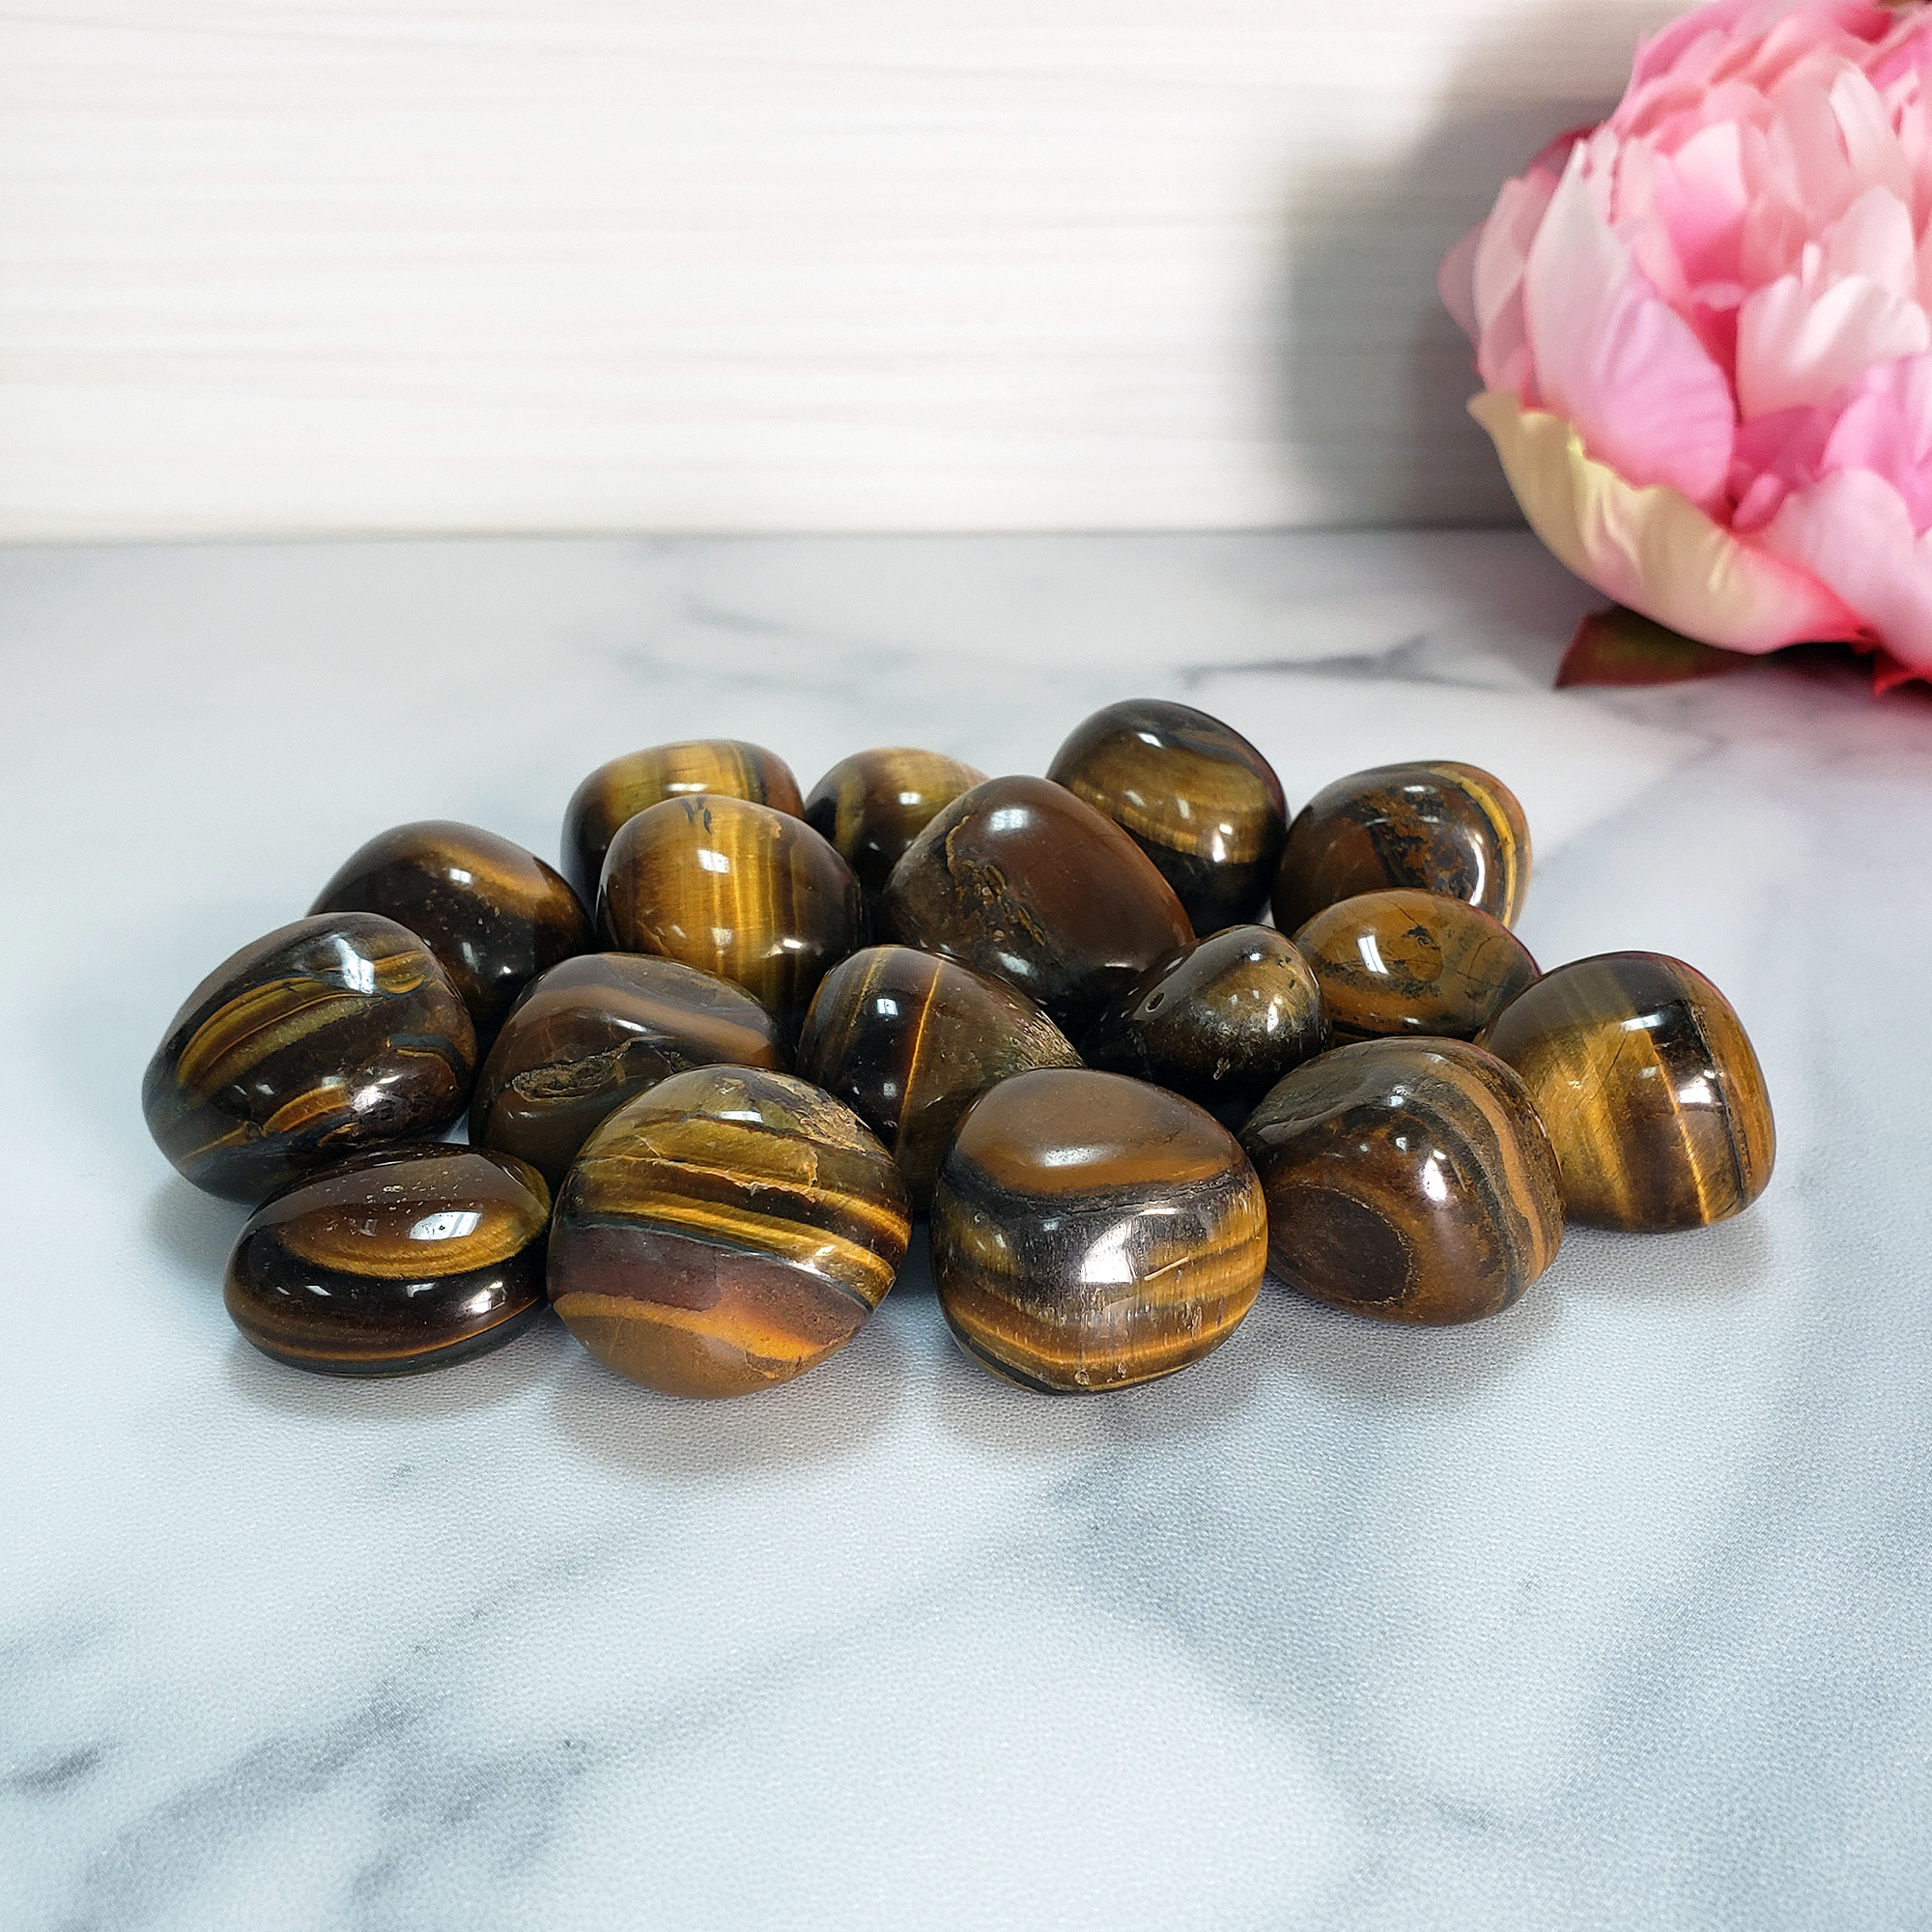 Tigers Eye Natural Tumbled Crystal - One Stone - Grouped Photo